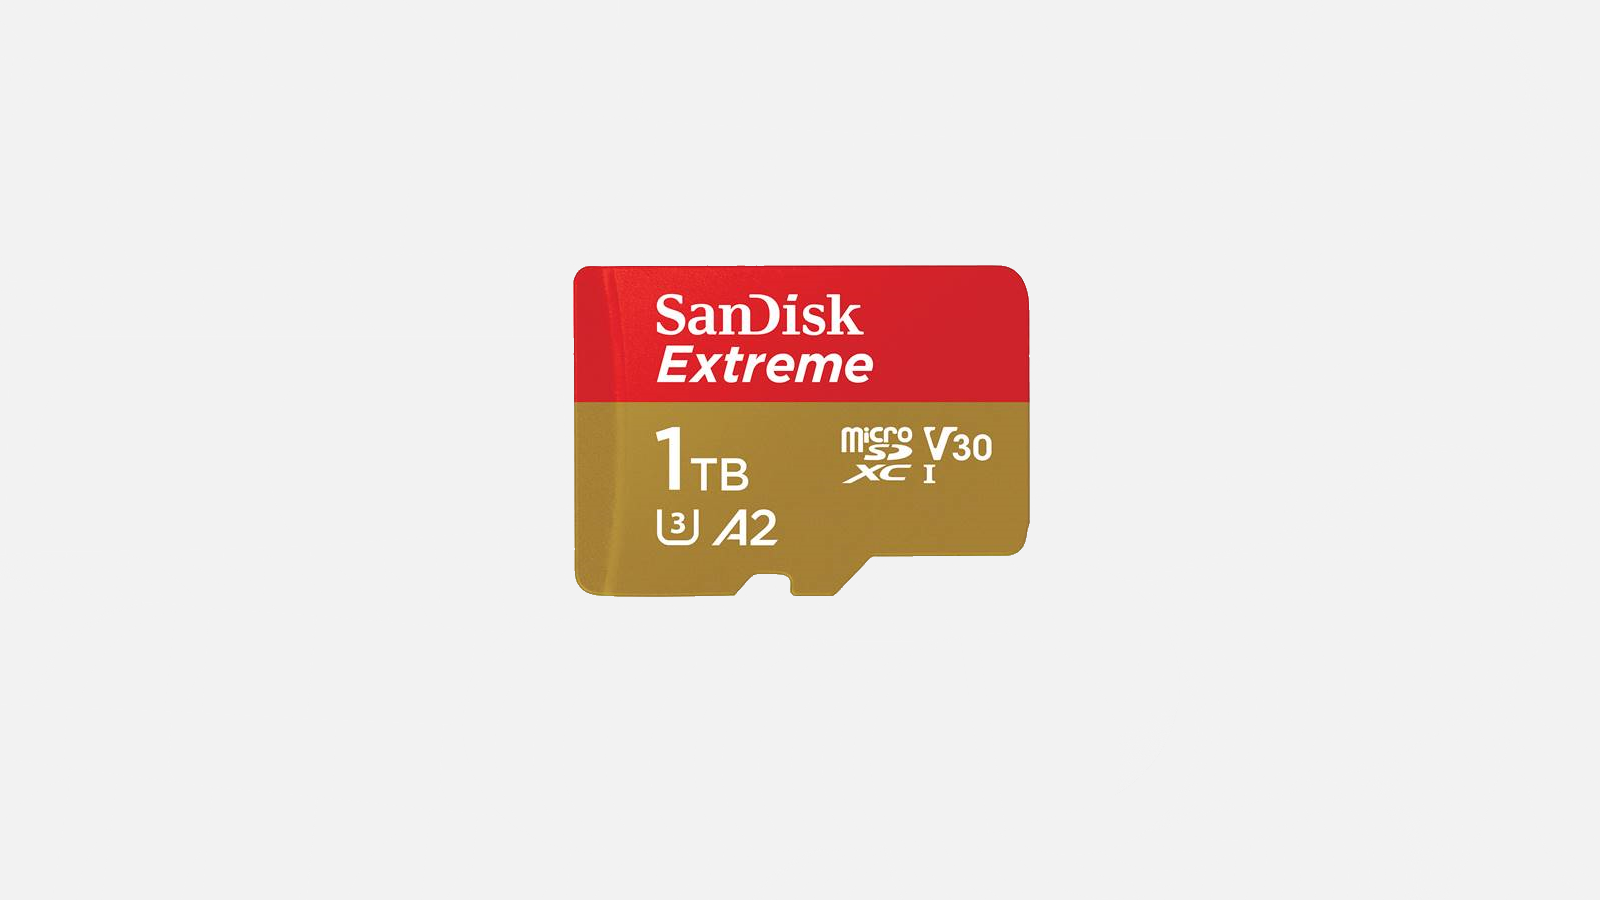 microSD cards have reached 1TB capacity